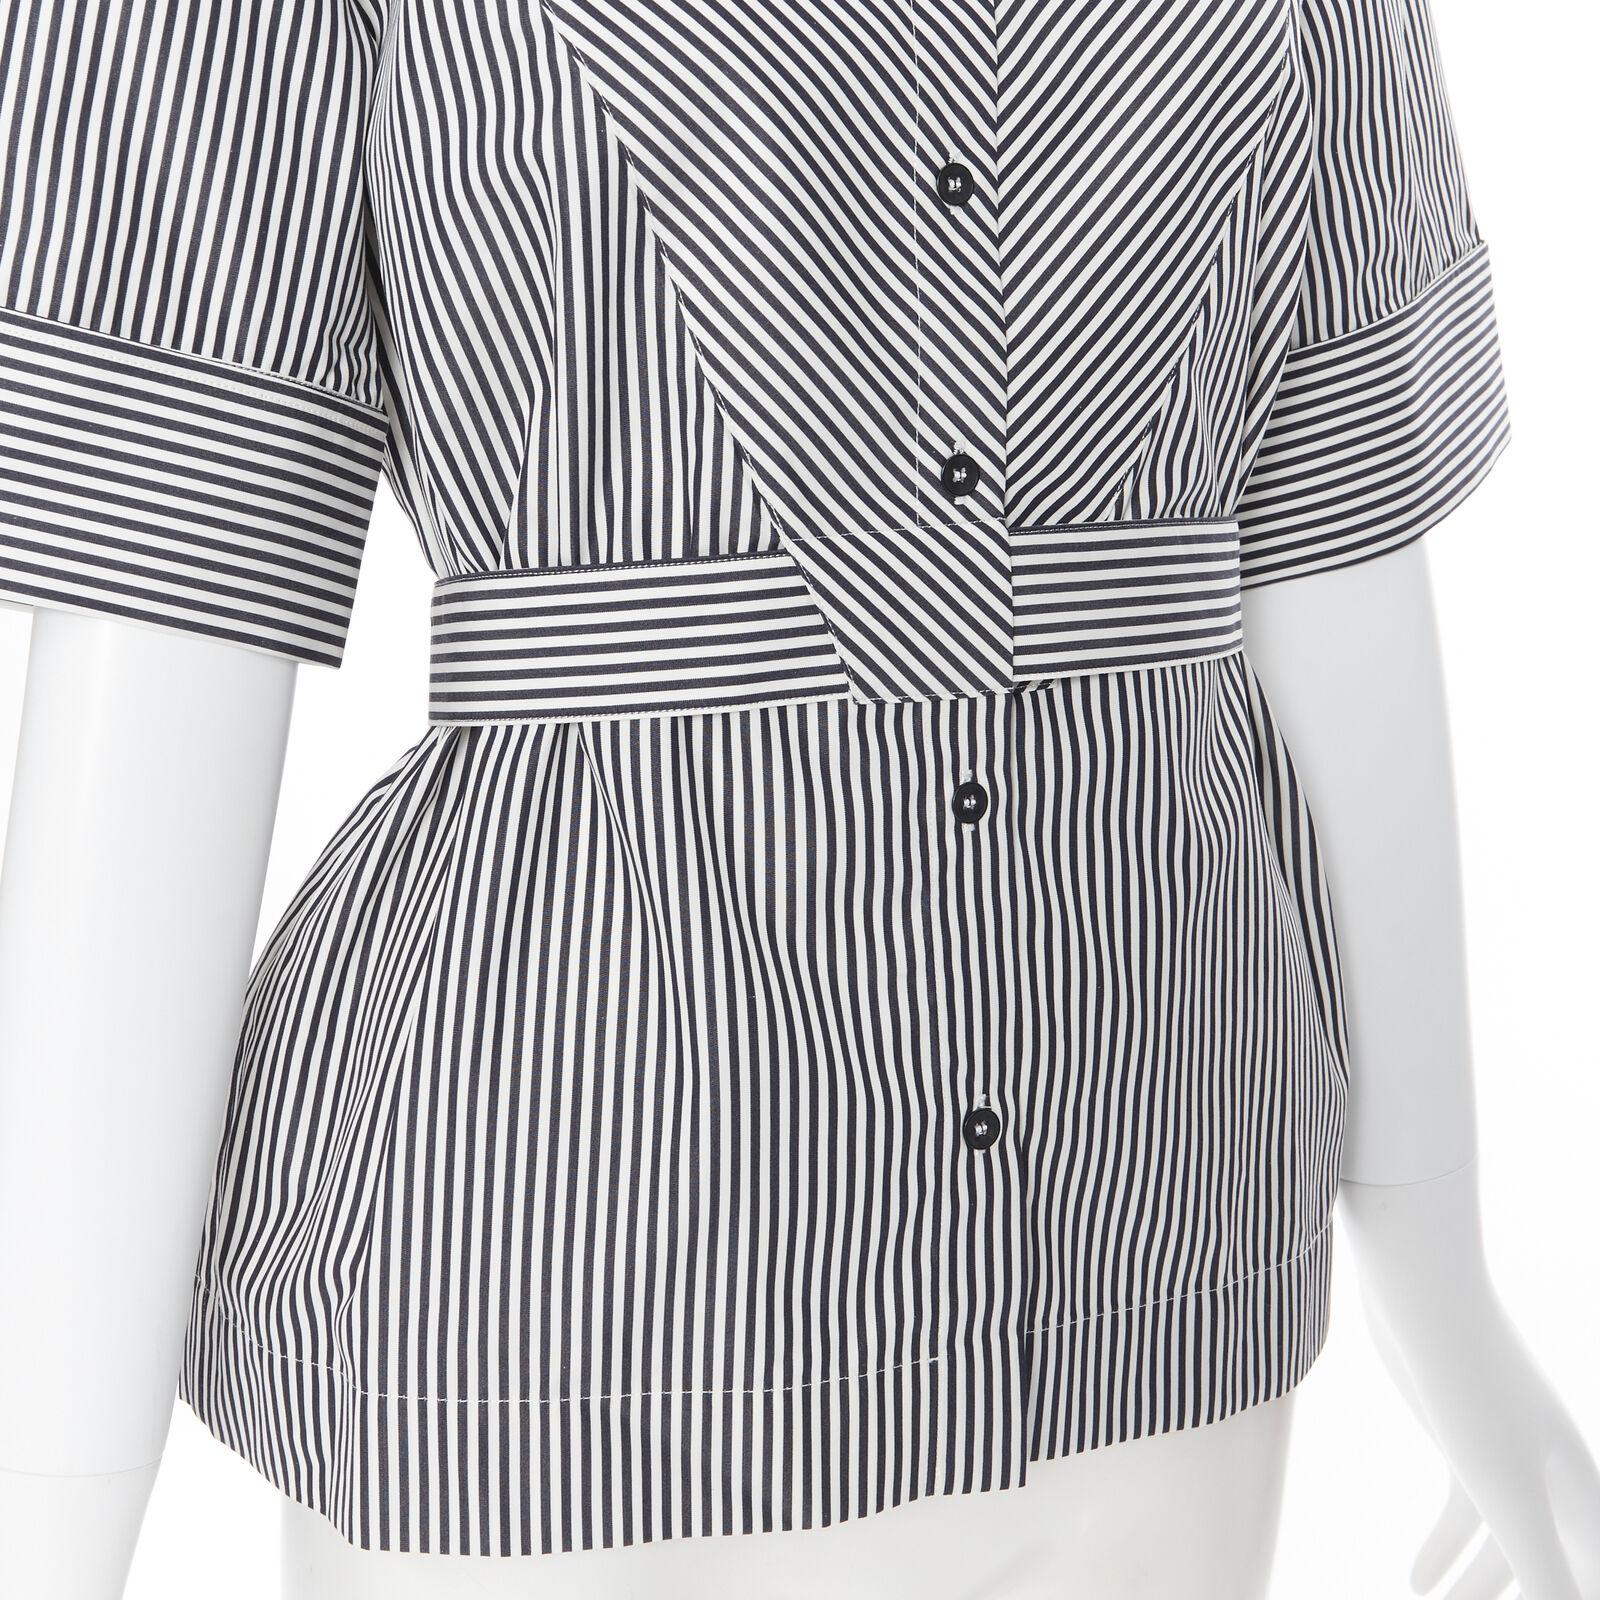 PALMER HARDING 100% cotton navy white contrast stripe cinched waist shirt UK6 XS
Reference: SNKO/A00122
Brand: Palmer Harding
Material: Cotton
Color: Navy, White
Pattern: Striped
Extra Details: 100% cotton. Navy and white stripe. Attached belt for